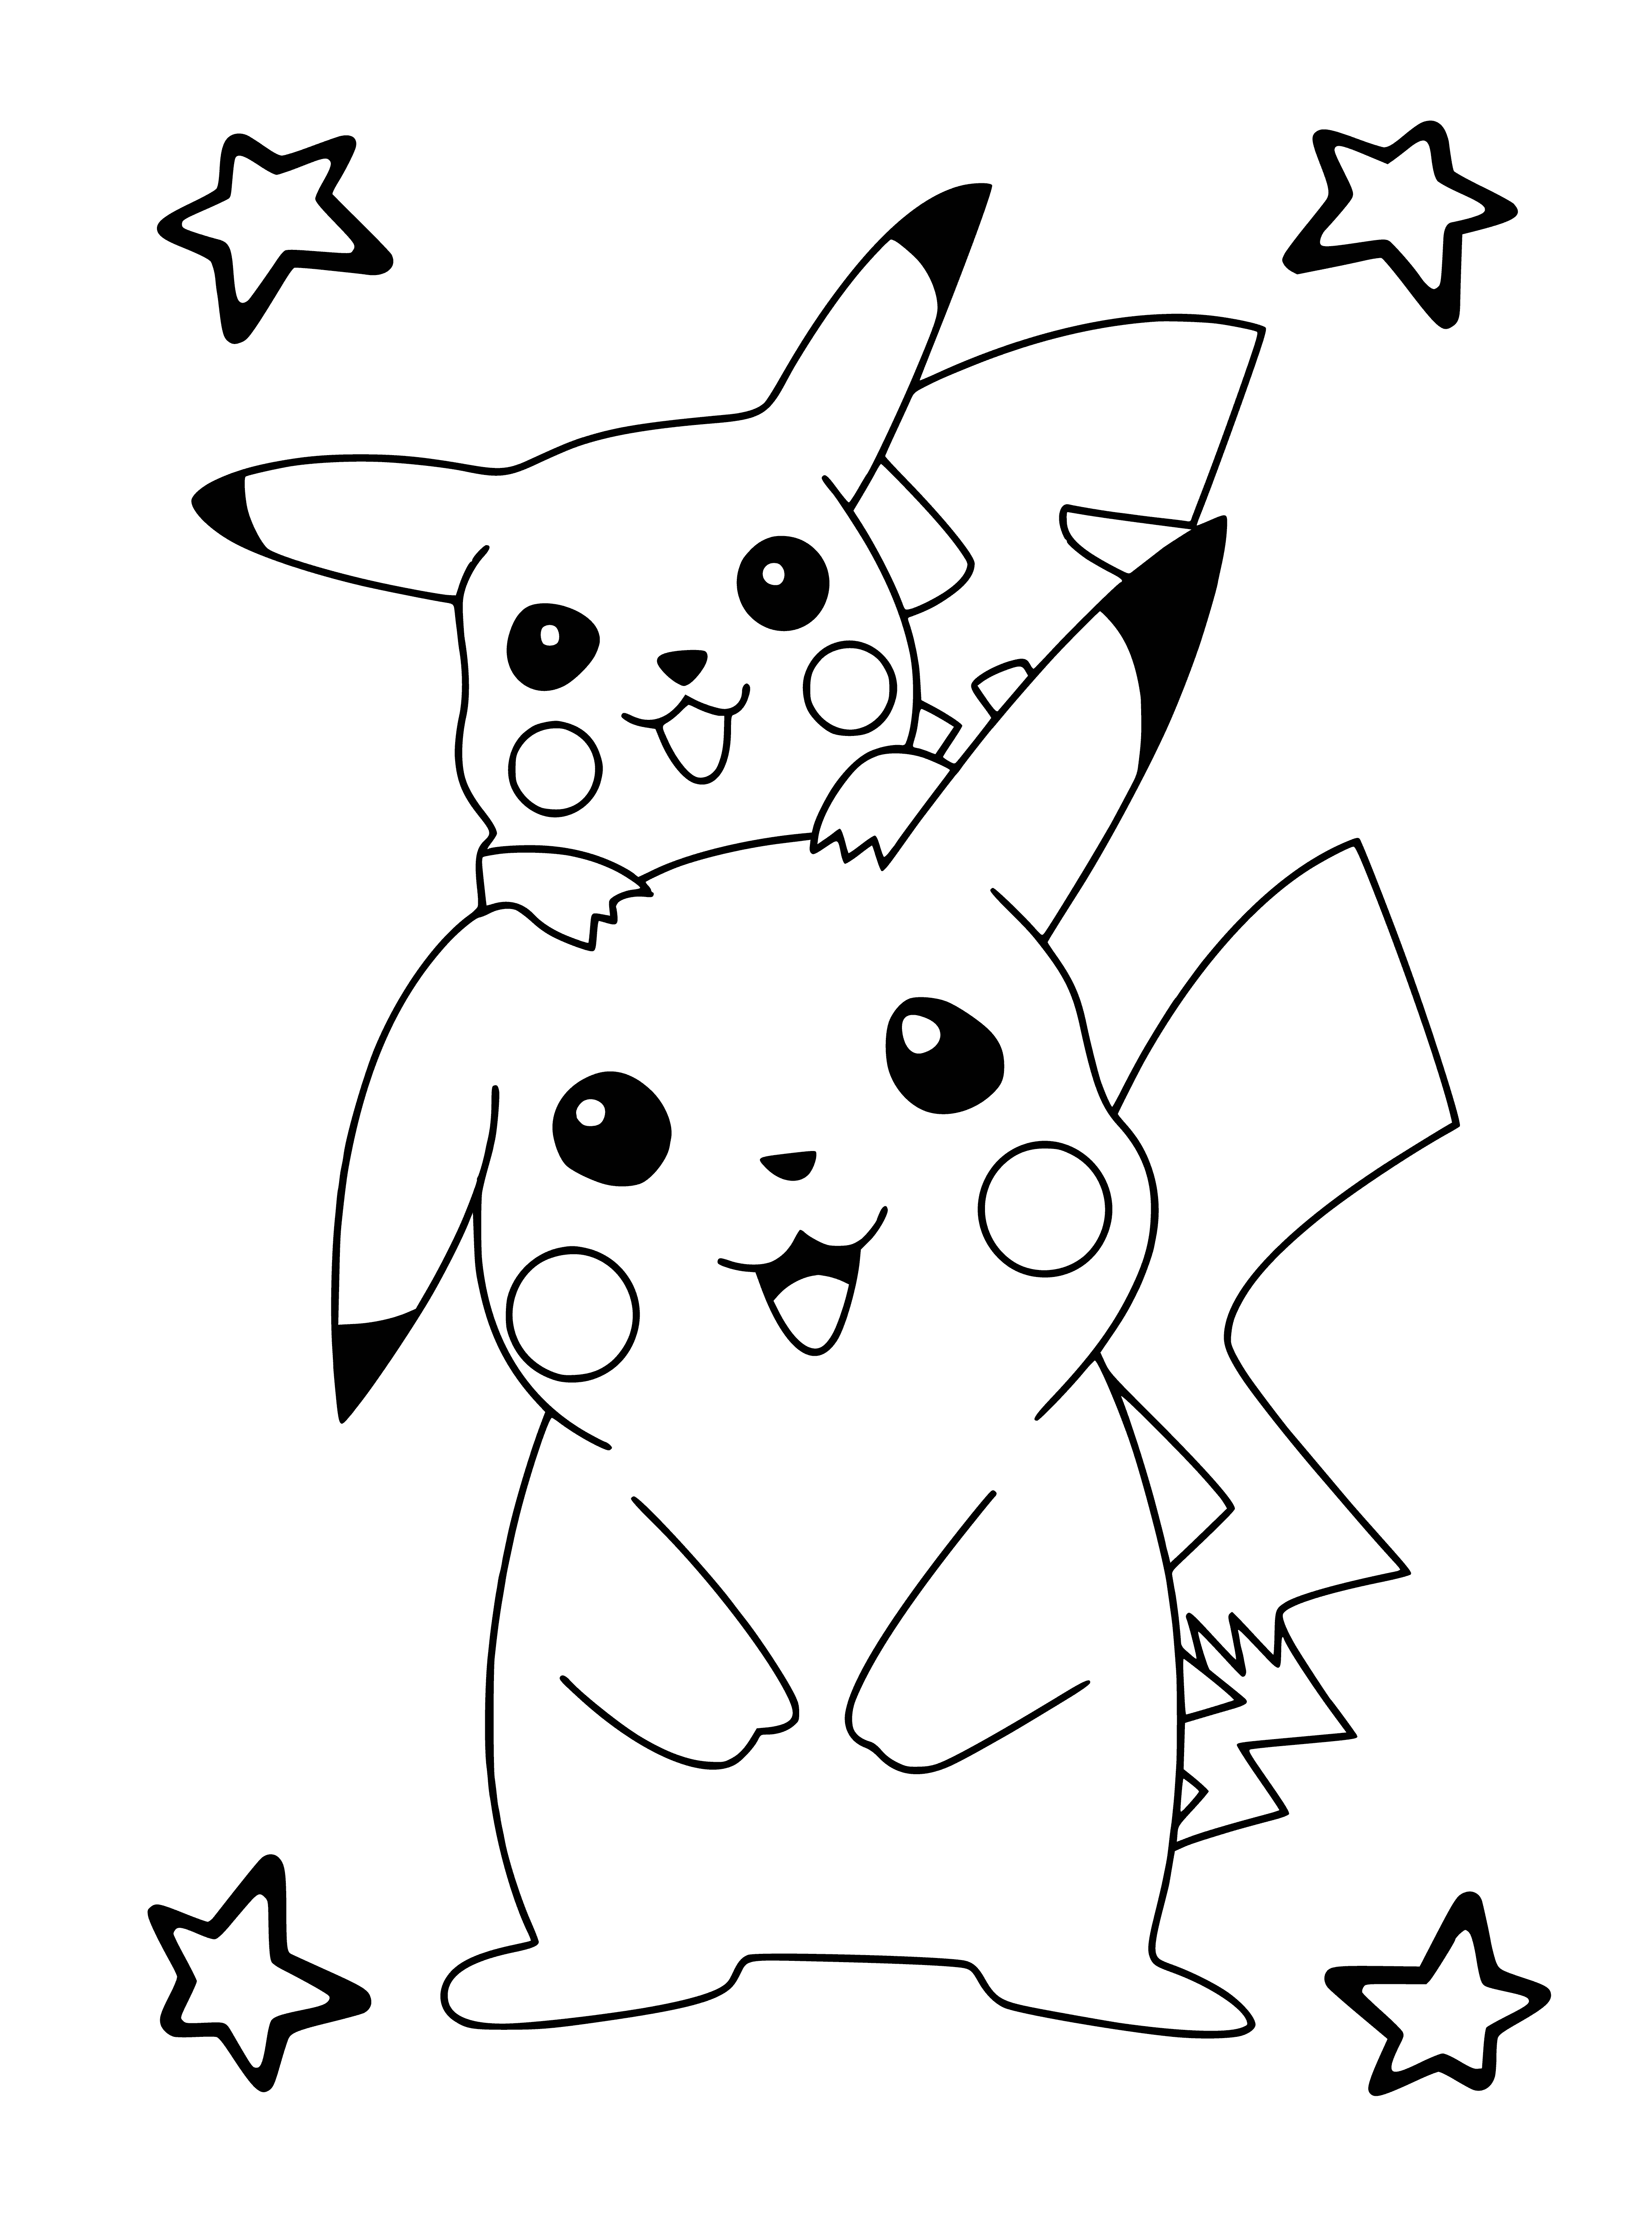 coloring page: Yellow creature with Investigative black eyes gets zapped by Pikachu's mouth with Lighting bolt-shaped tail. #PokemonColoringPage